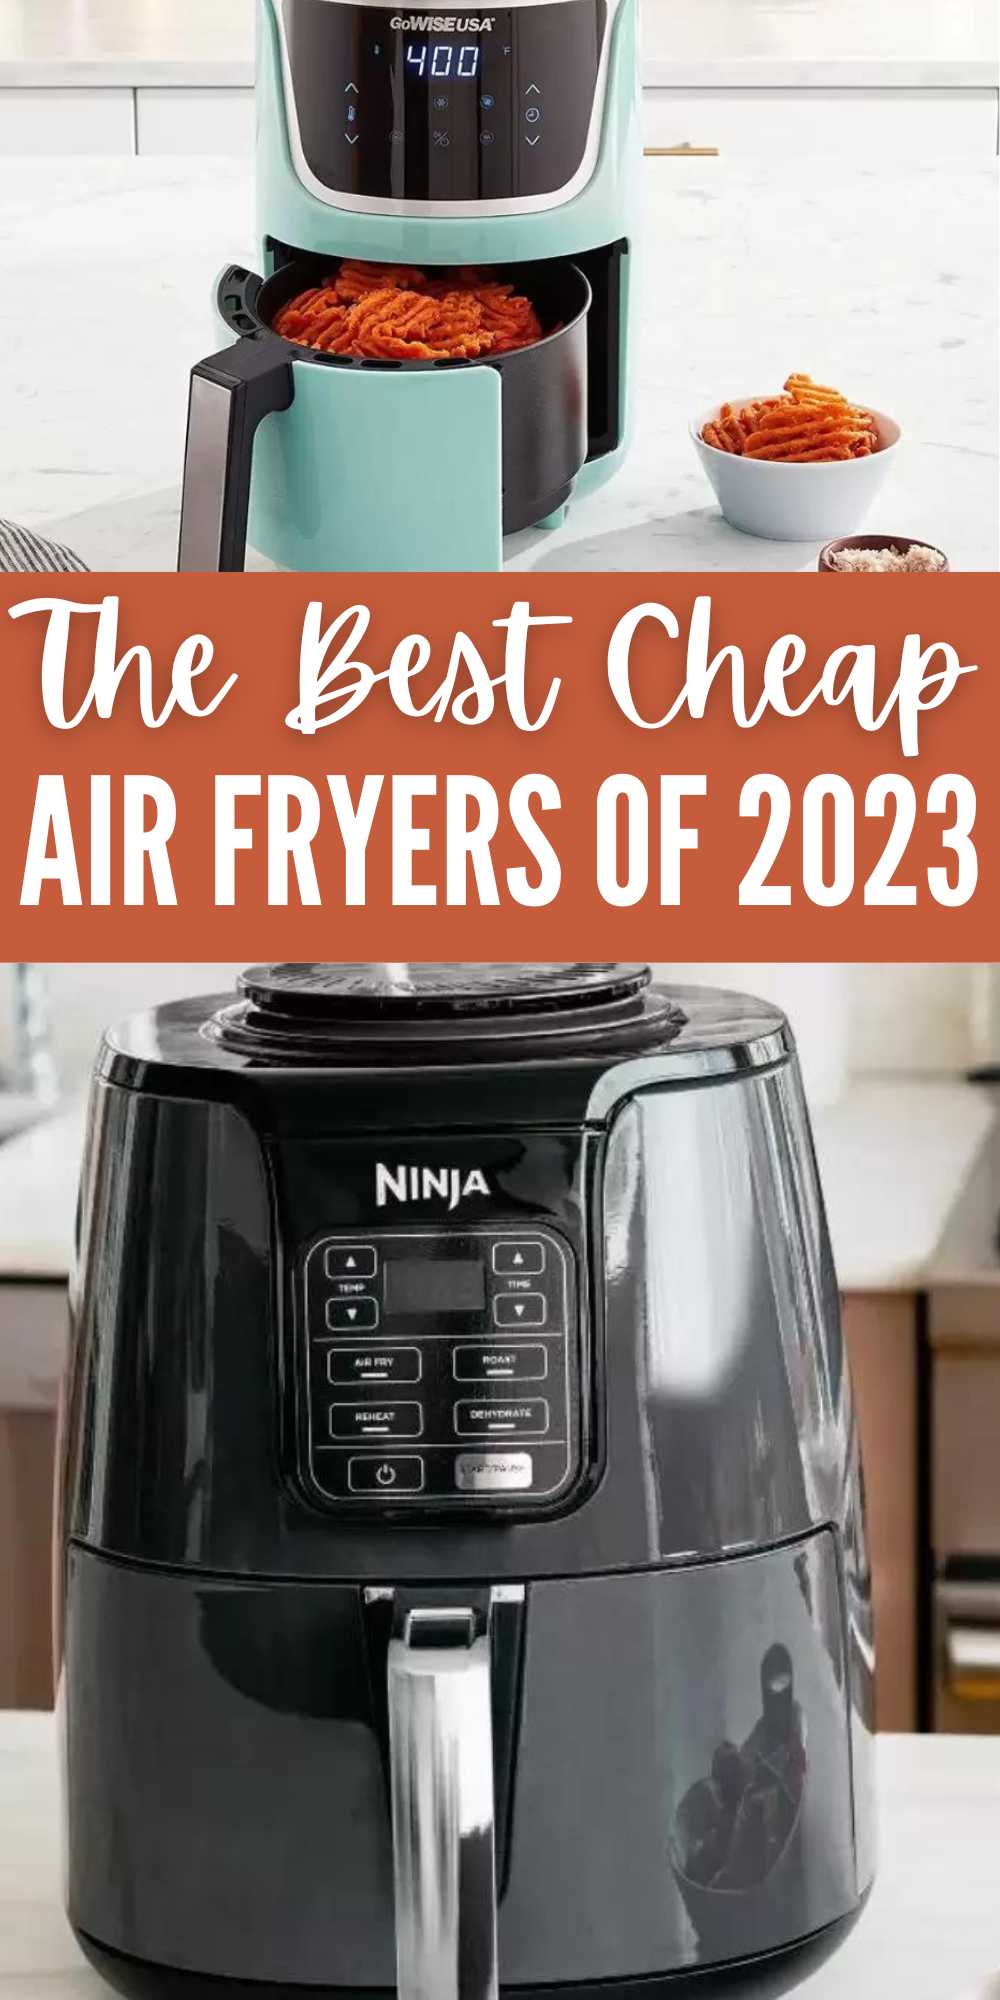 The Best Air Fryer is Small, Cheap, and Makes All Your Food Crisp and Tasty